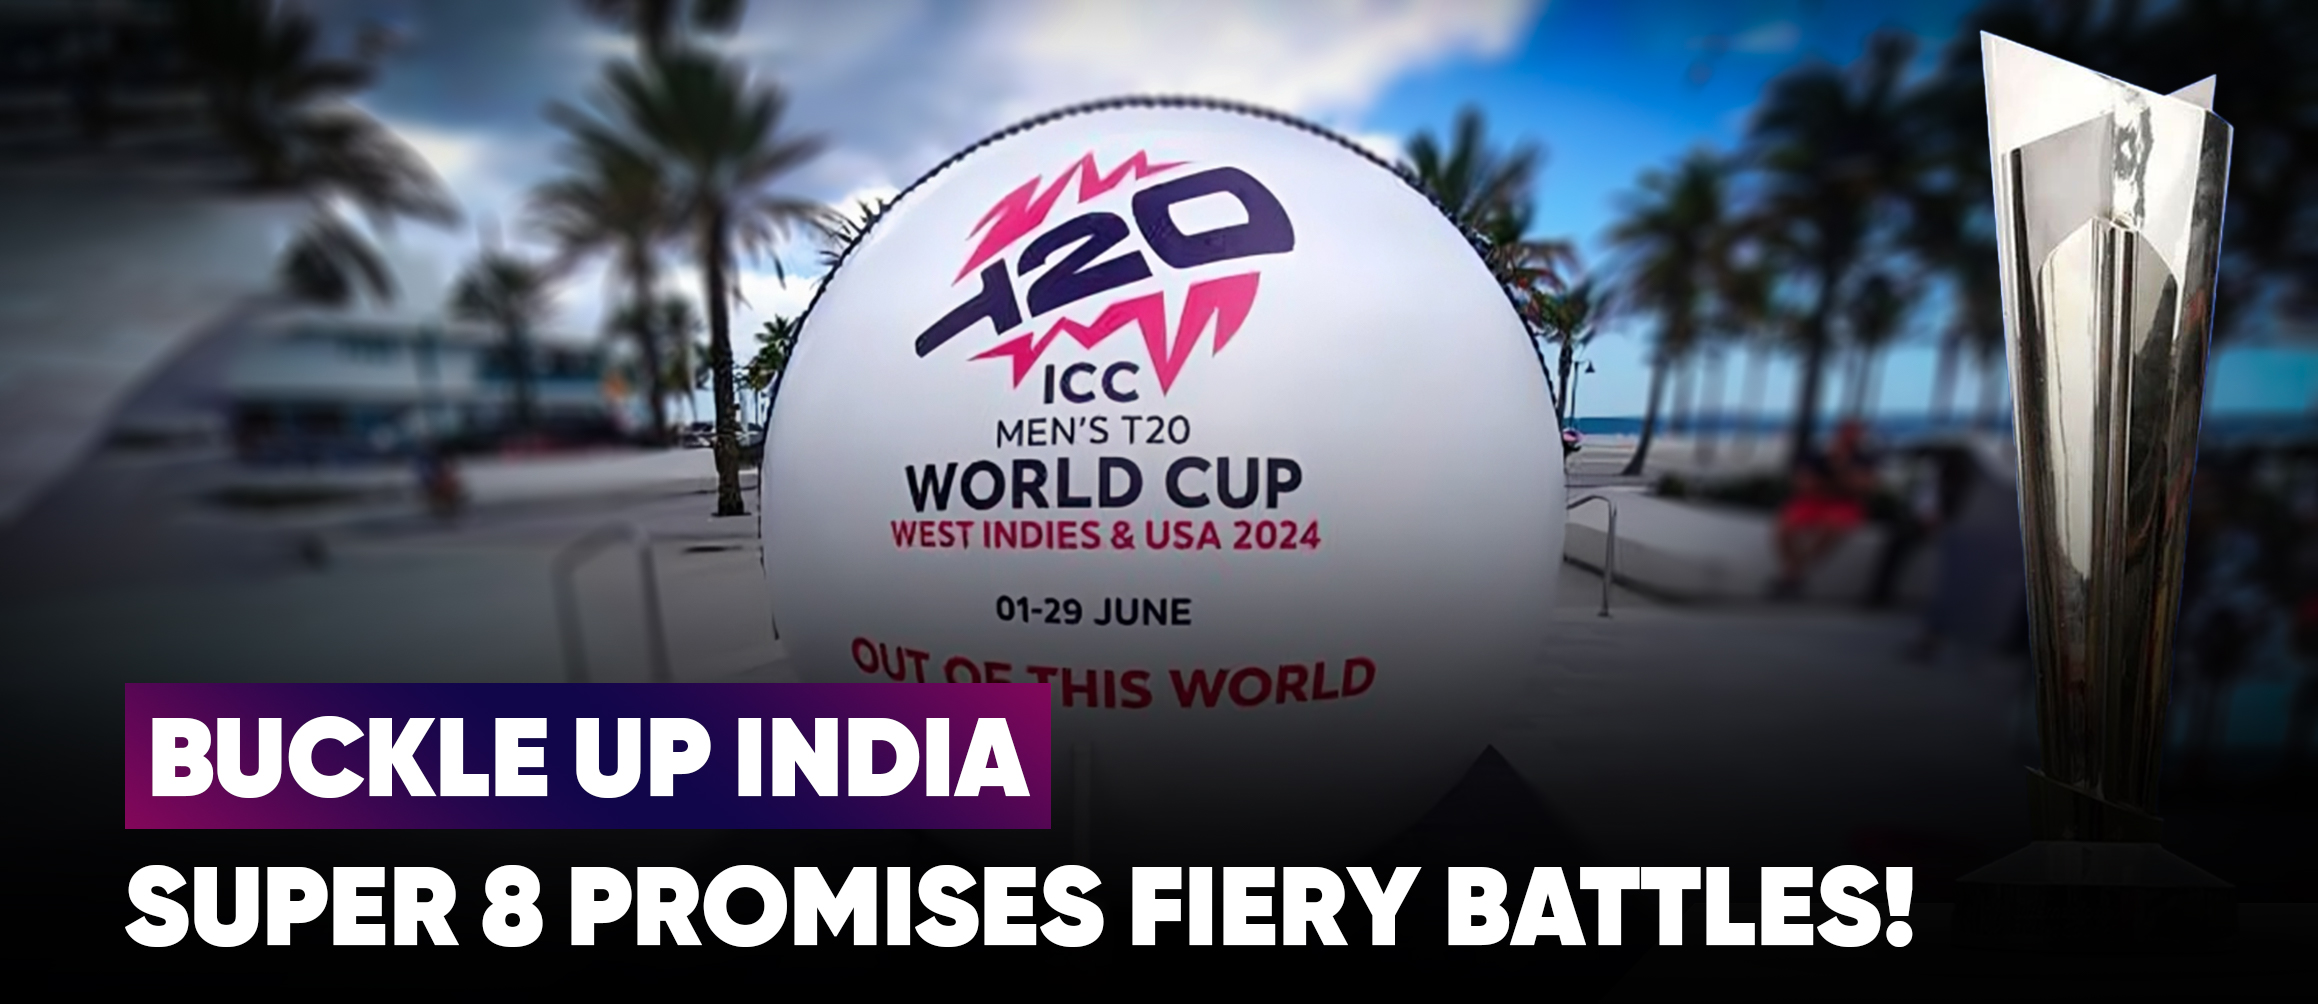 Buckle Up India, Super 8 Promises Fiery Battles!